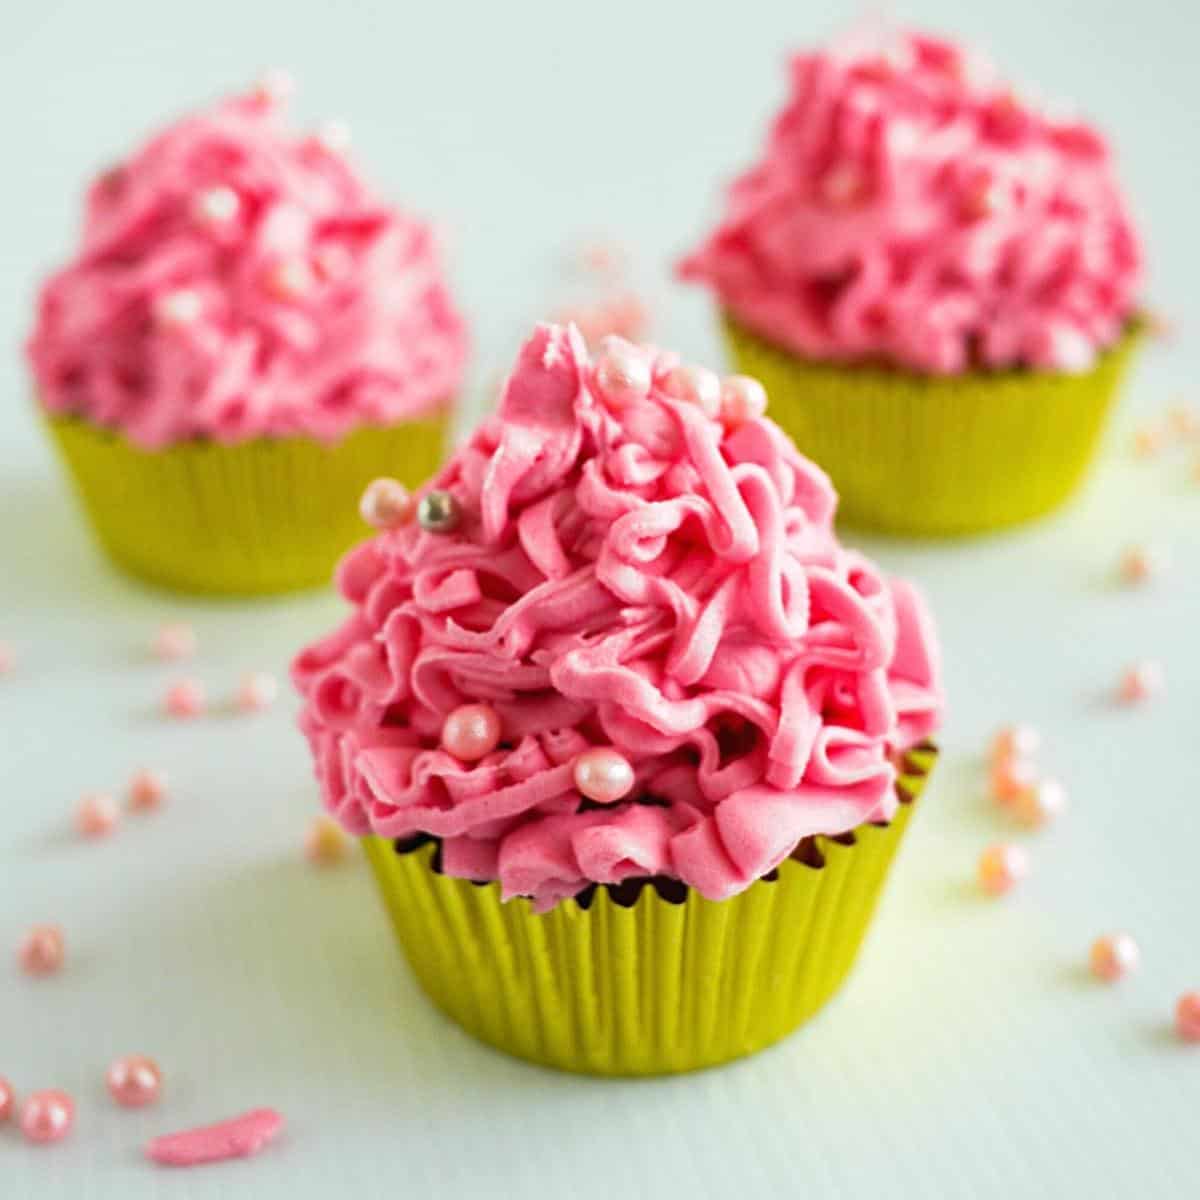 Pink frosted cupcakes on the table.